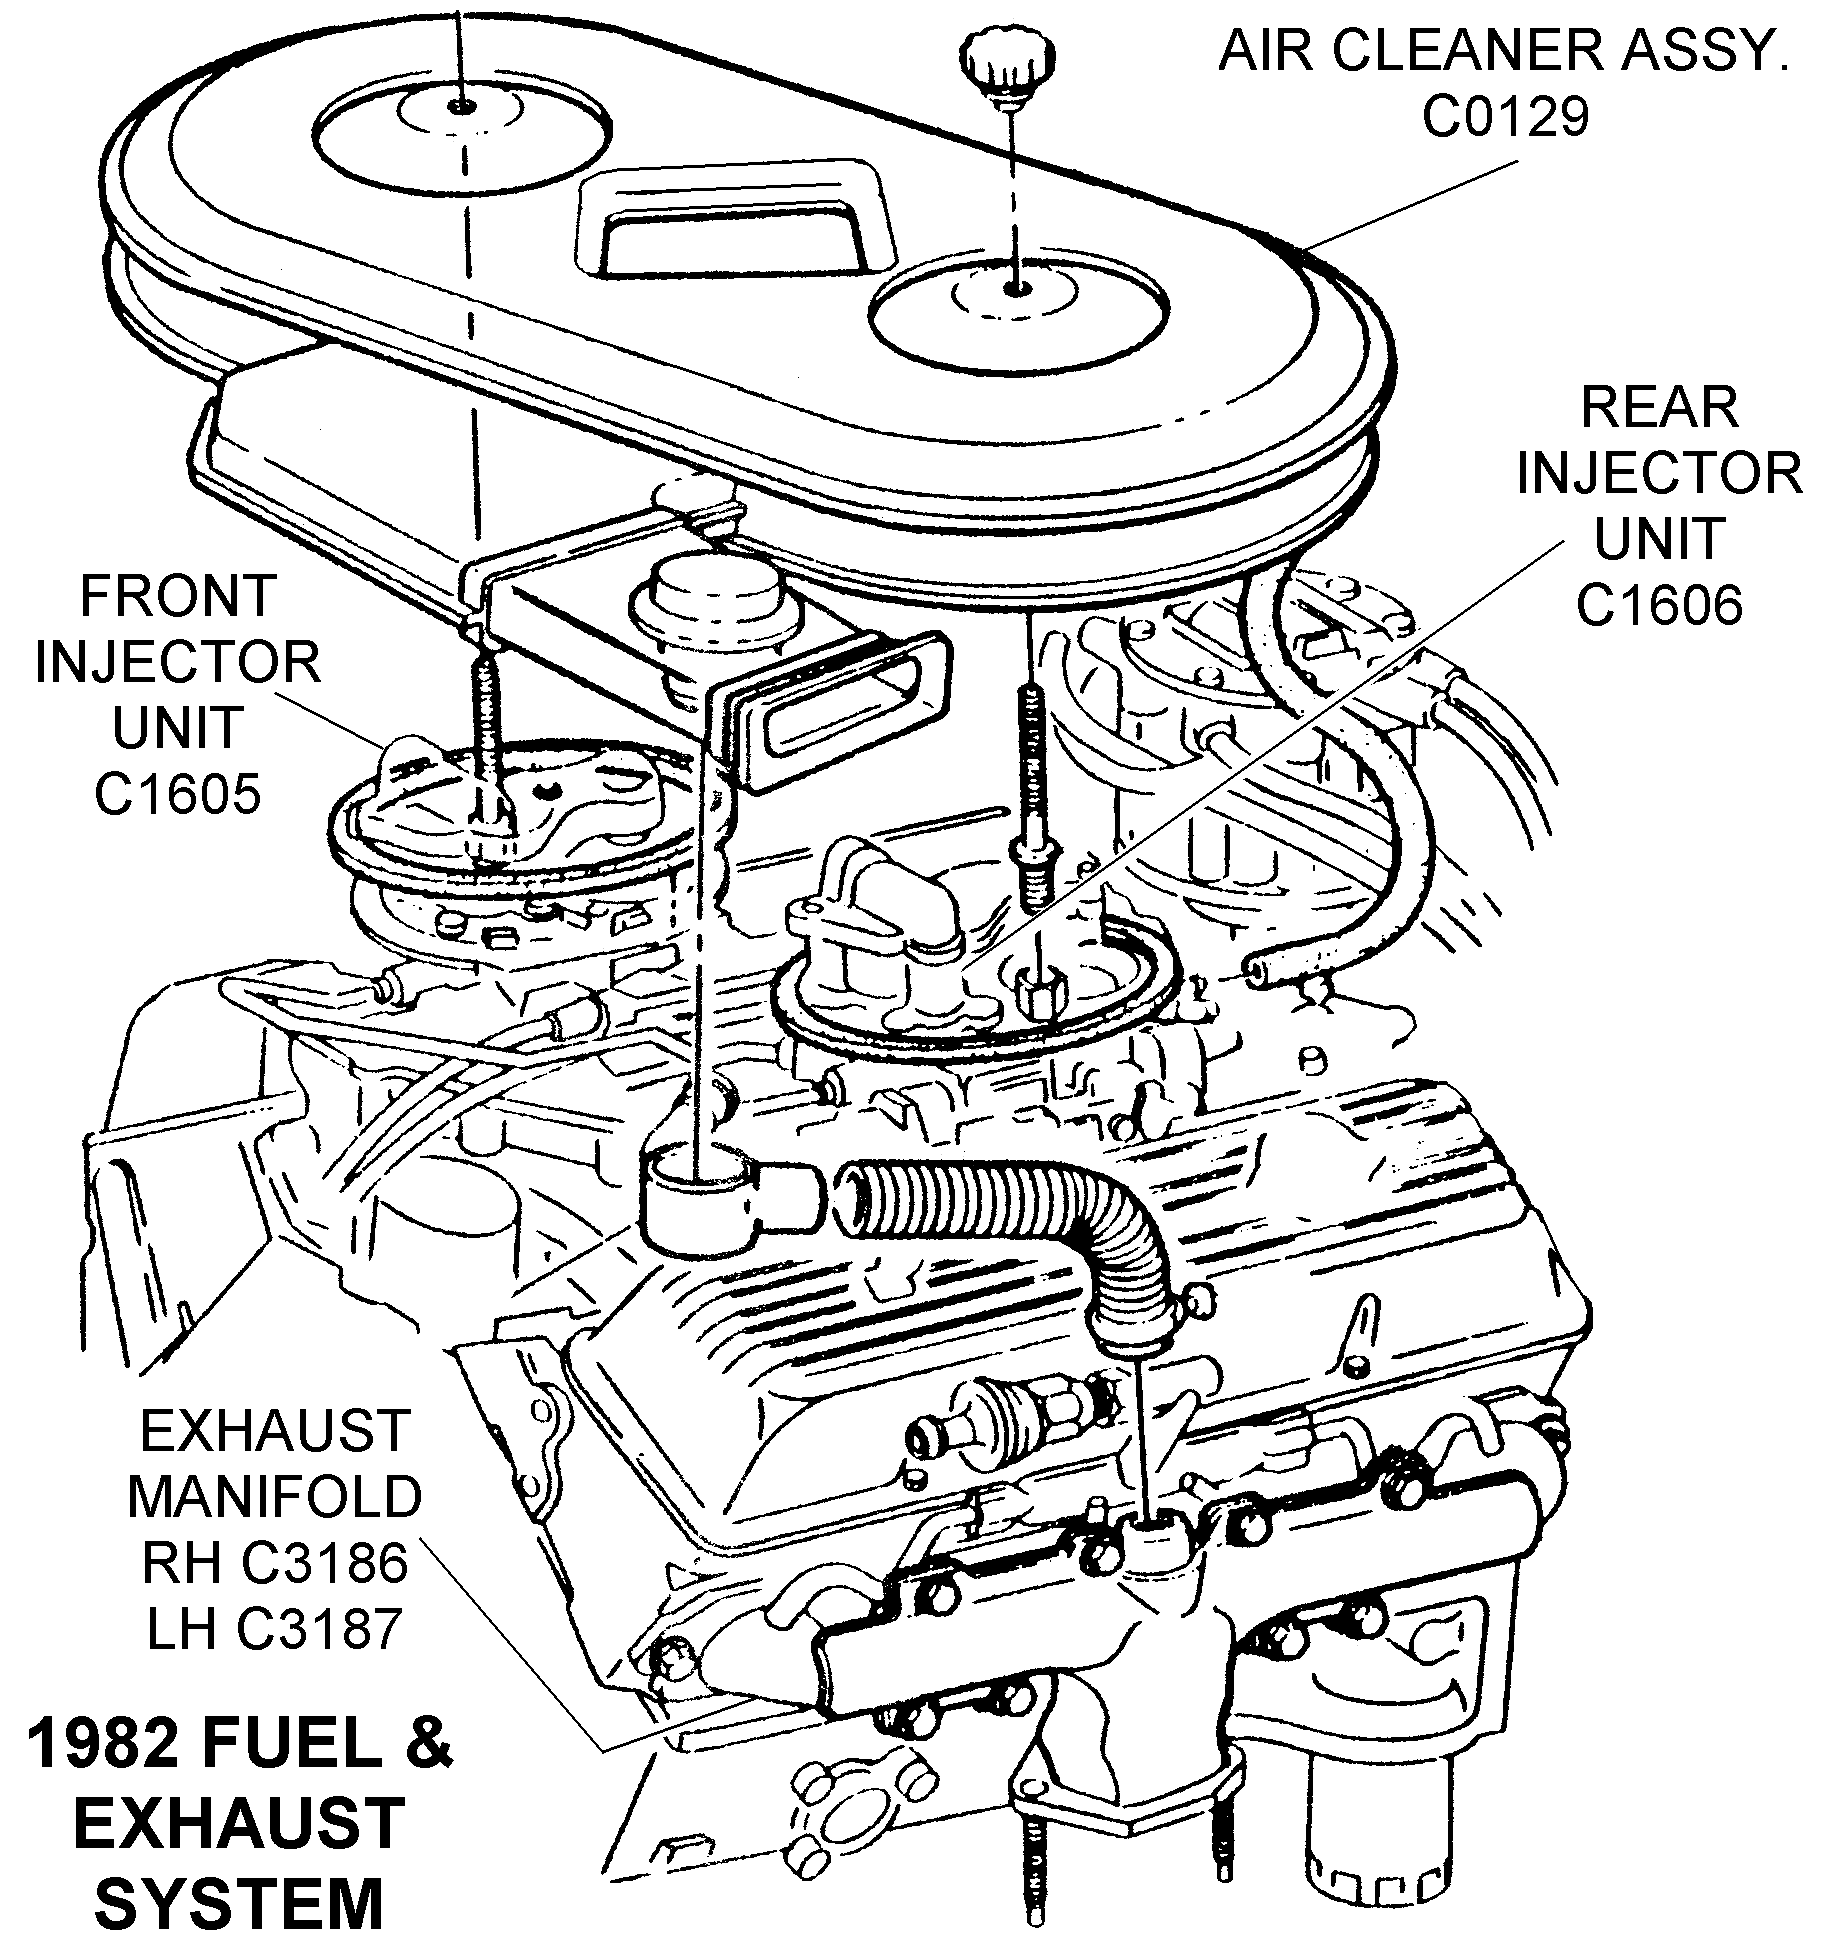 Fuel And Exhaust System - Diagram View